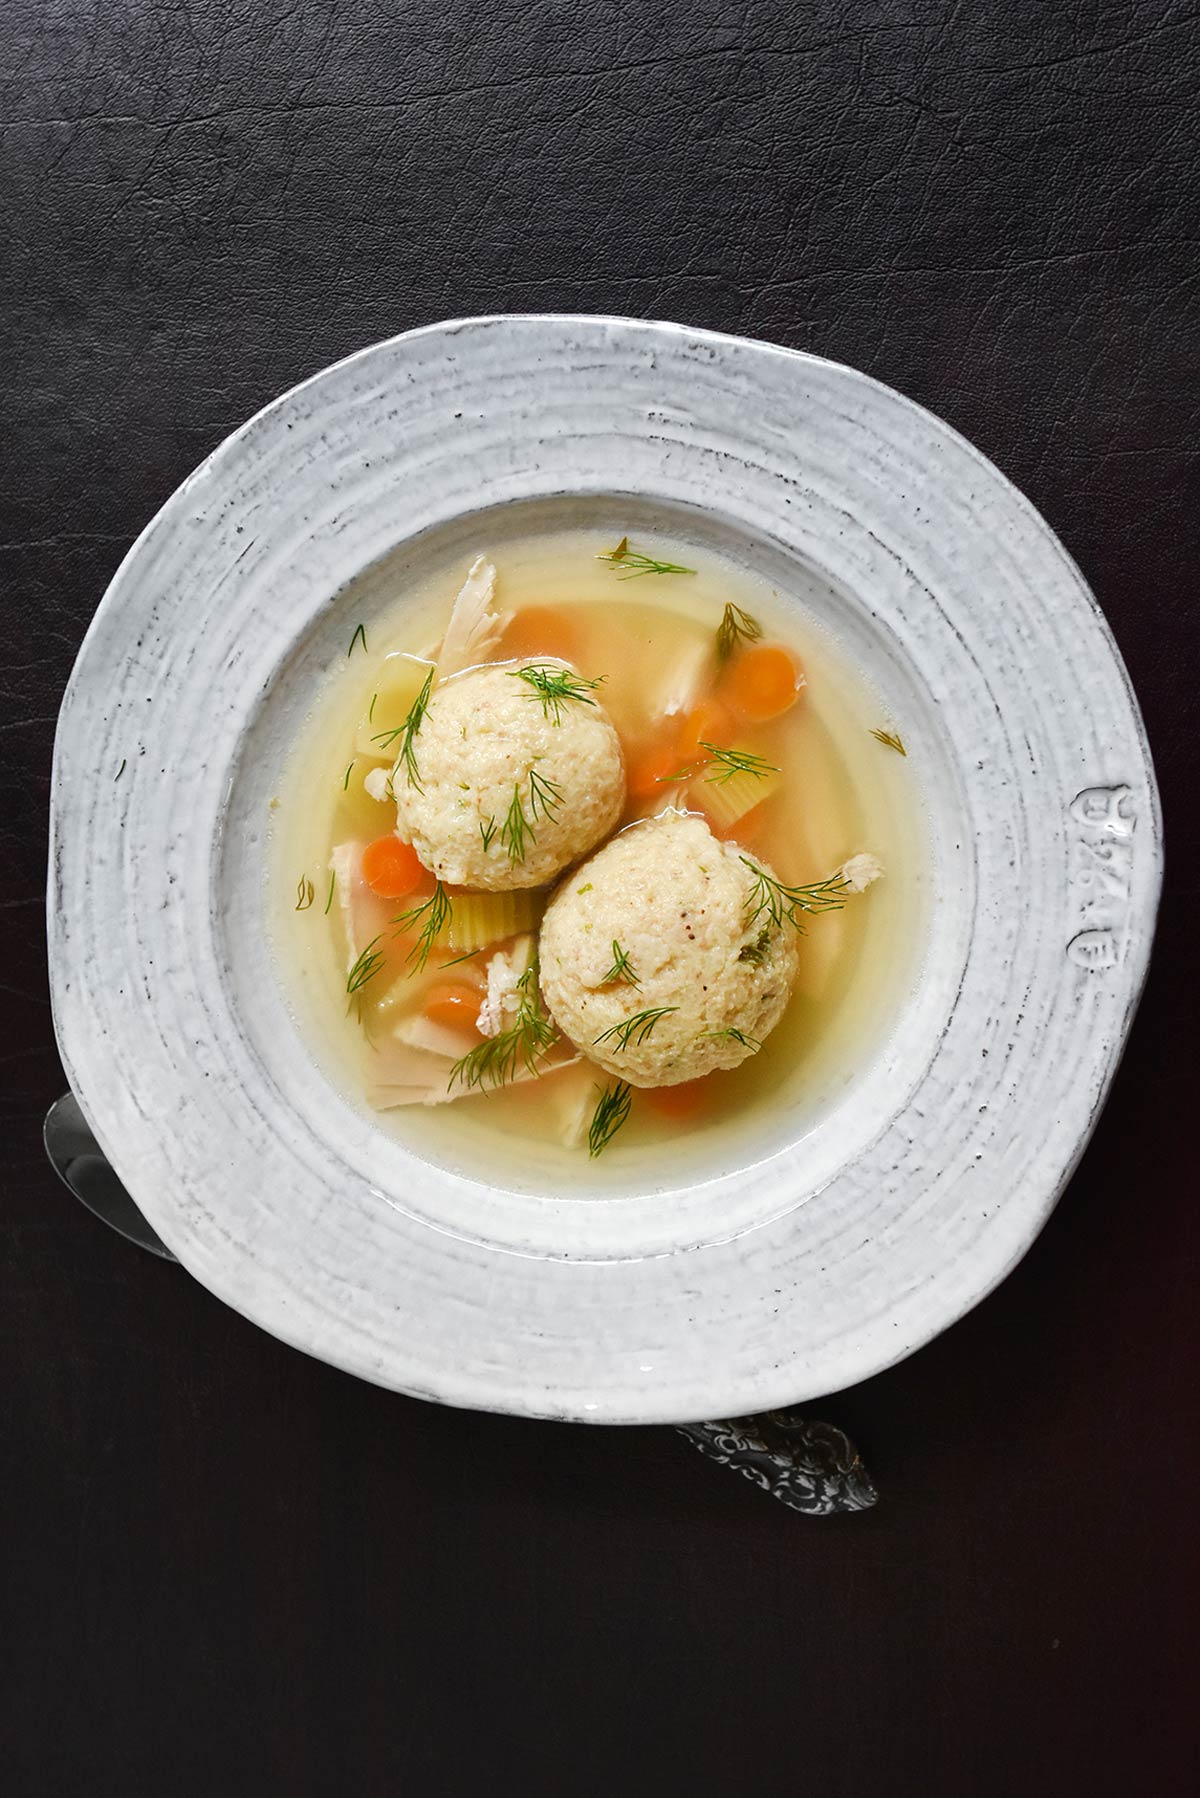 How to Find the Best Matzo Ball Recipes?